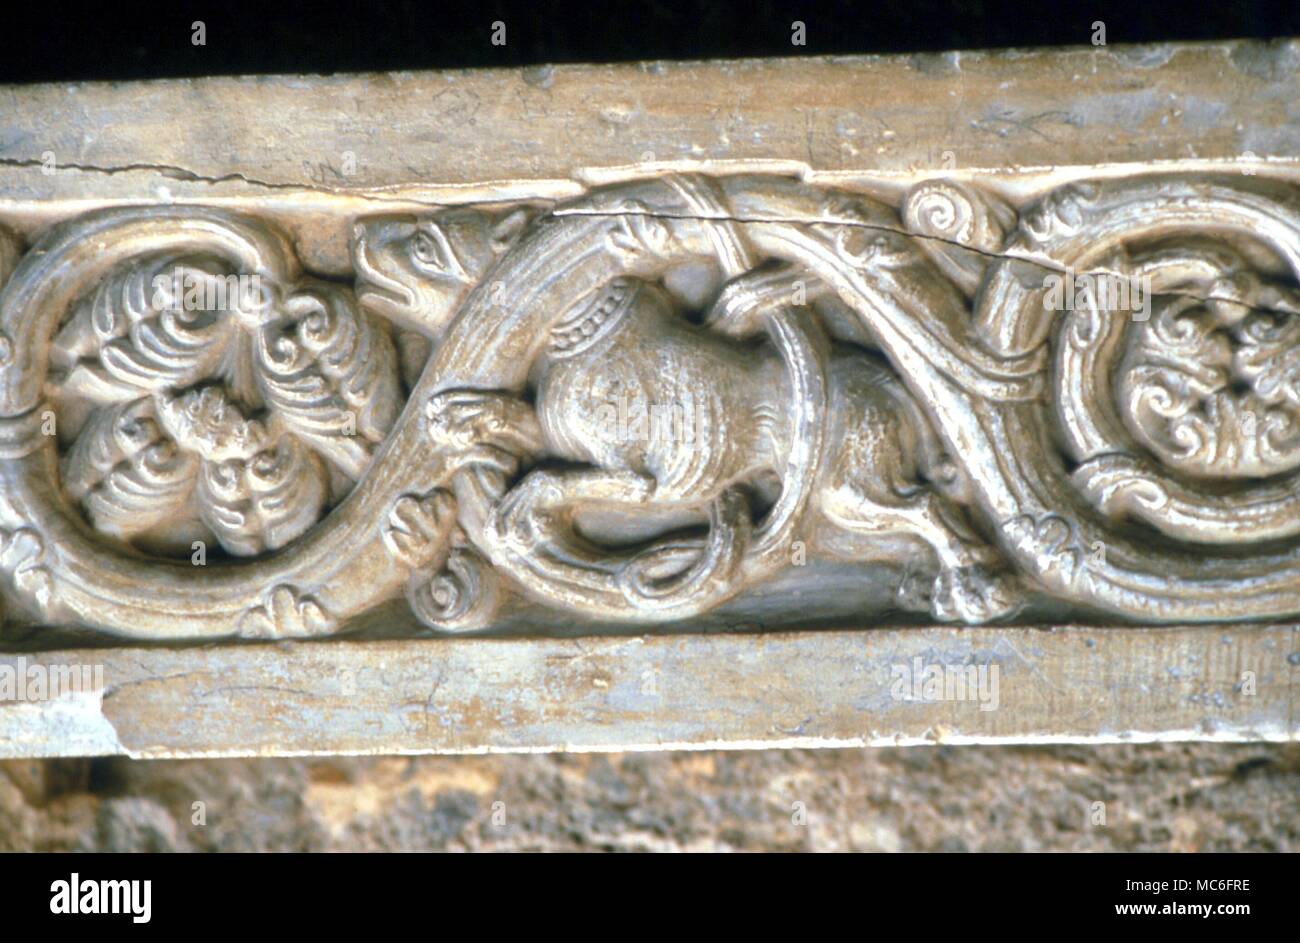 Bs-relief of dog, from the thirteenth century 'zodiacal portal' in Sagra di San Michele, Val di Susa, Italy Stock Photo